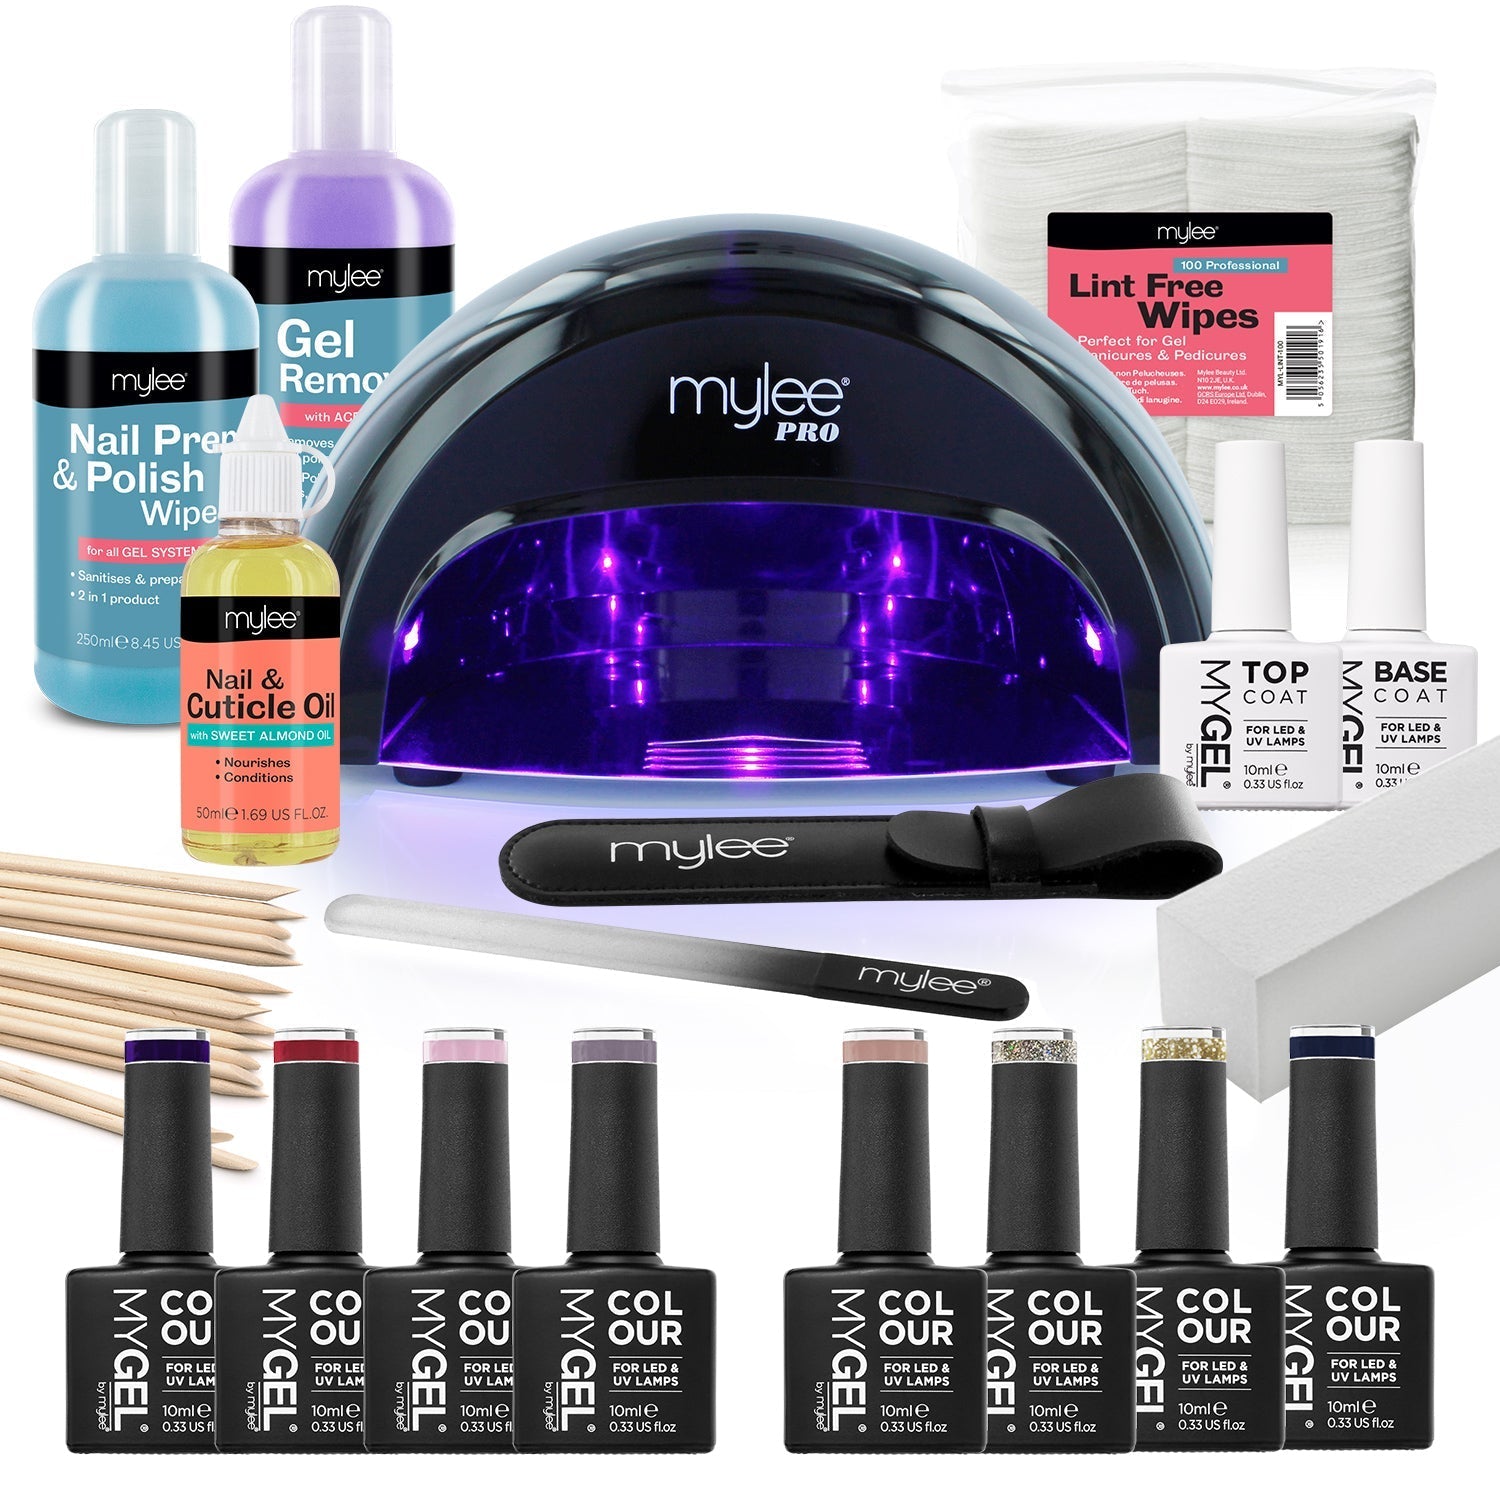 Mylee The Full Works Complete Gel Polish Kit (Black) - Autumn/Winter (Worth £165) - Long Lasting At Home Manicure/Pedicure